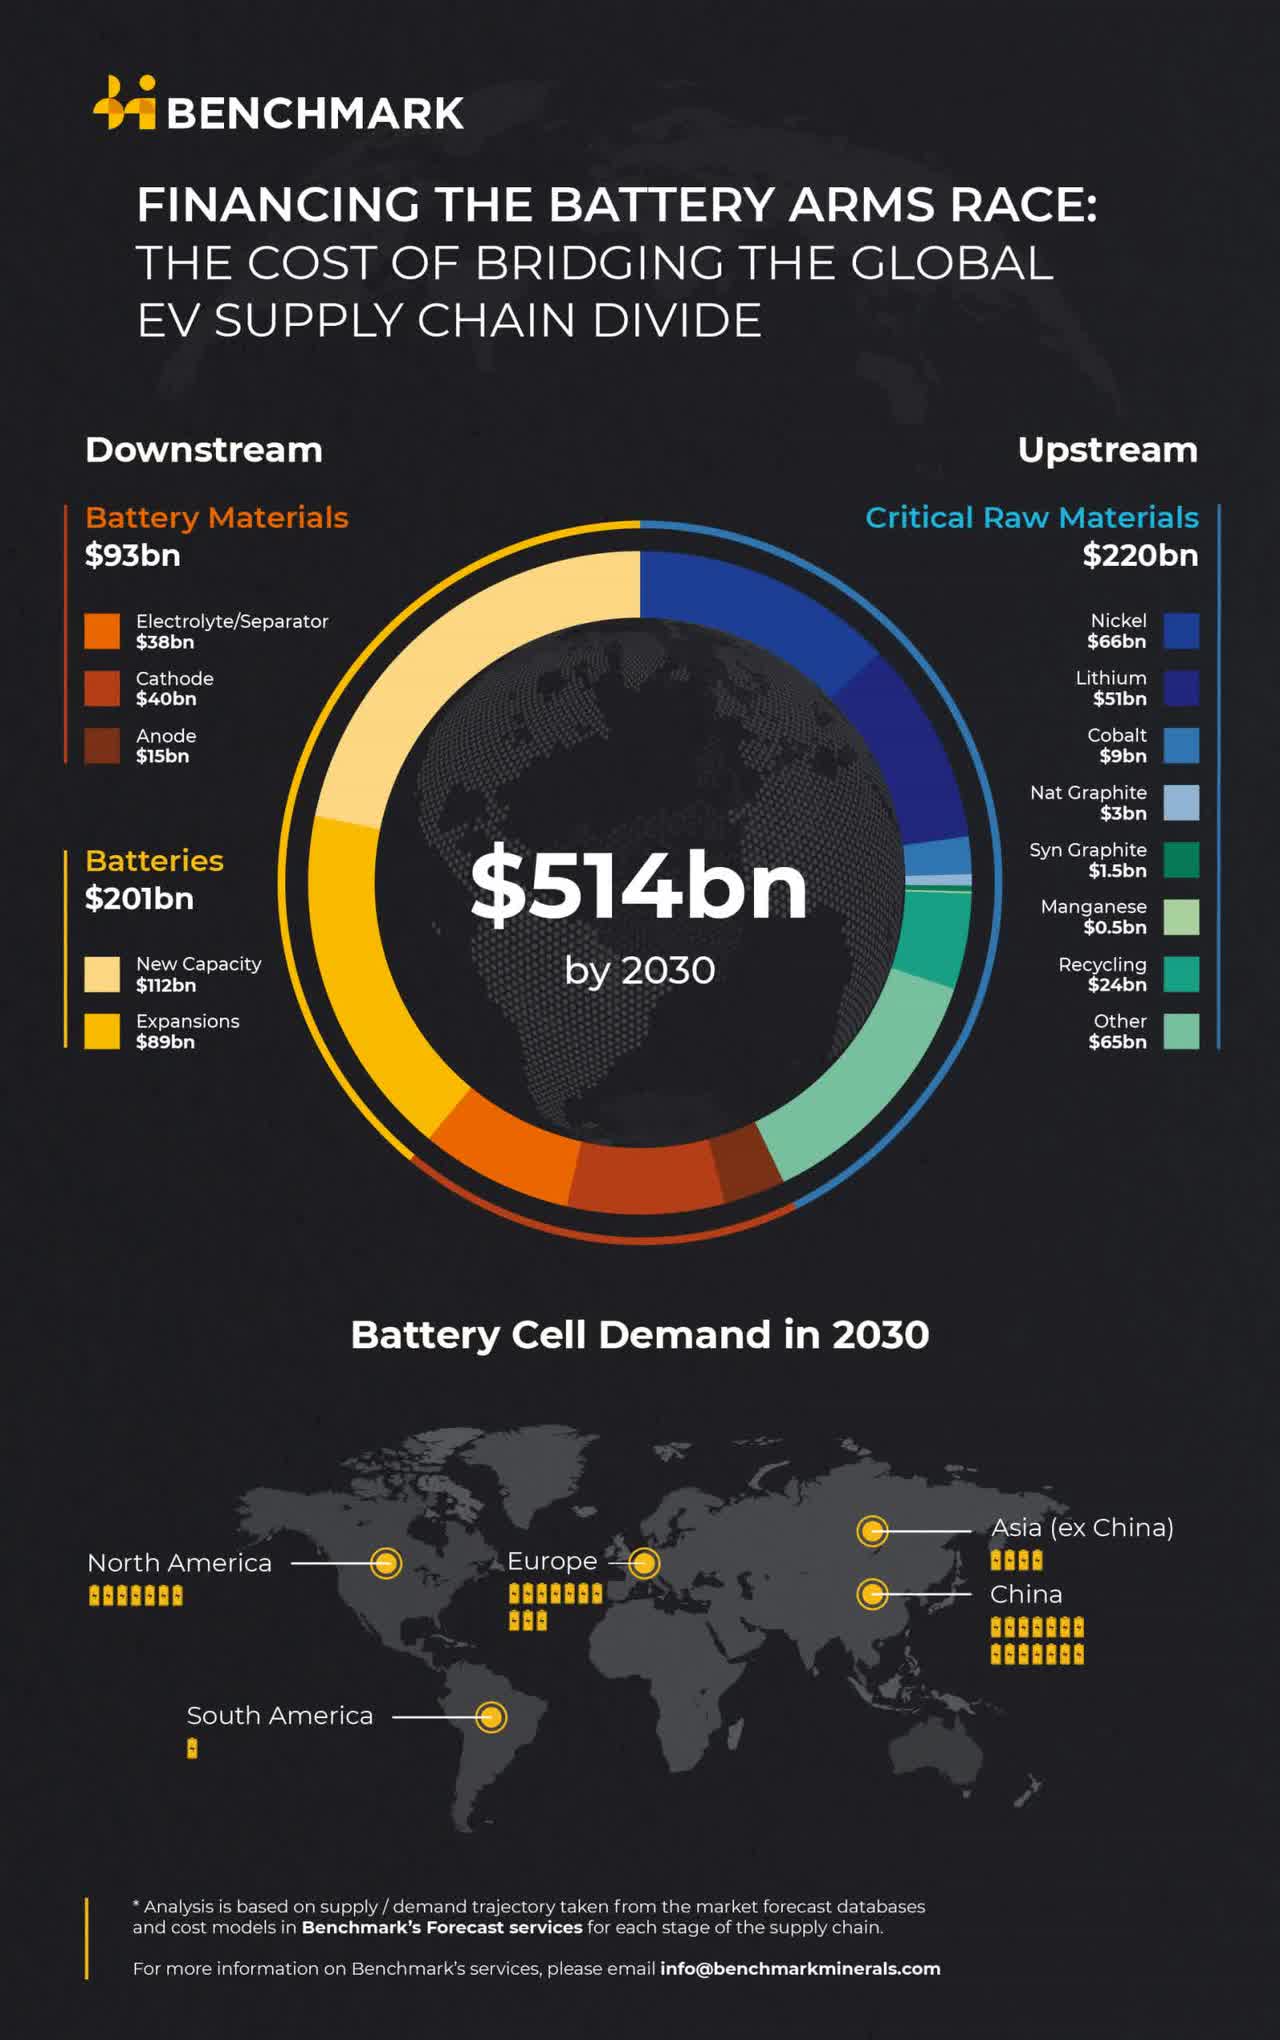 Benchmark breakdown of the supply chain estimated costs needed to reach 2030 battery cell demand estimates